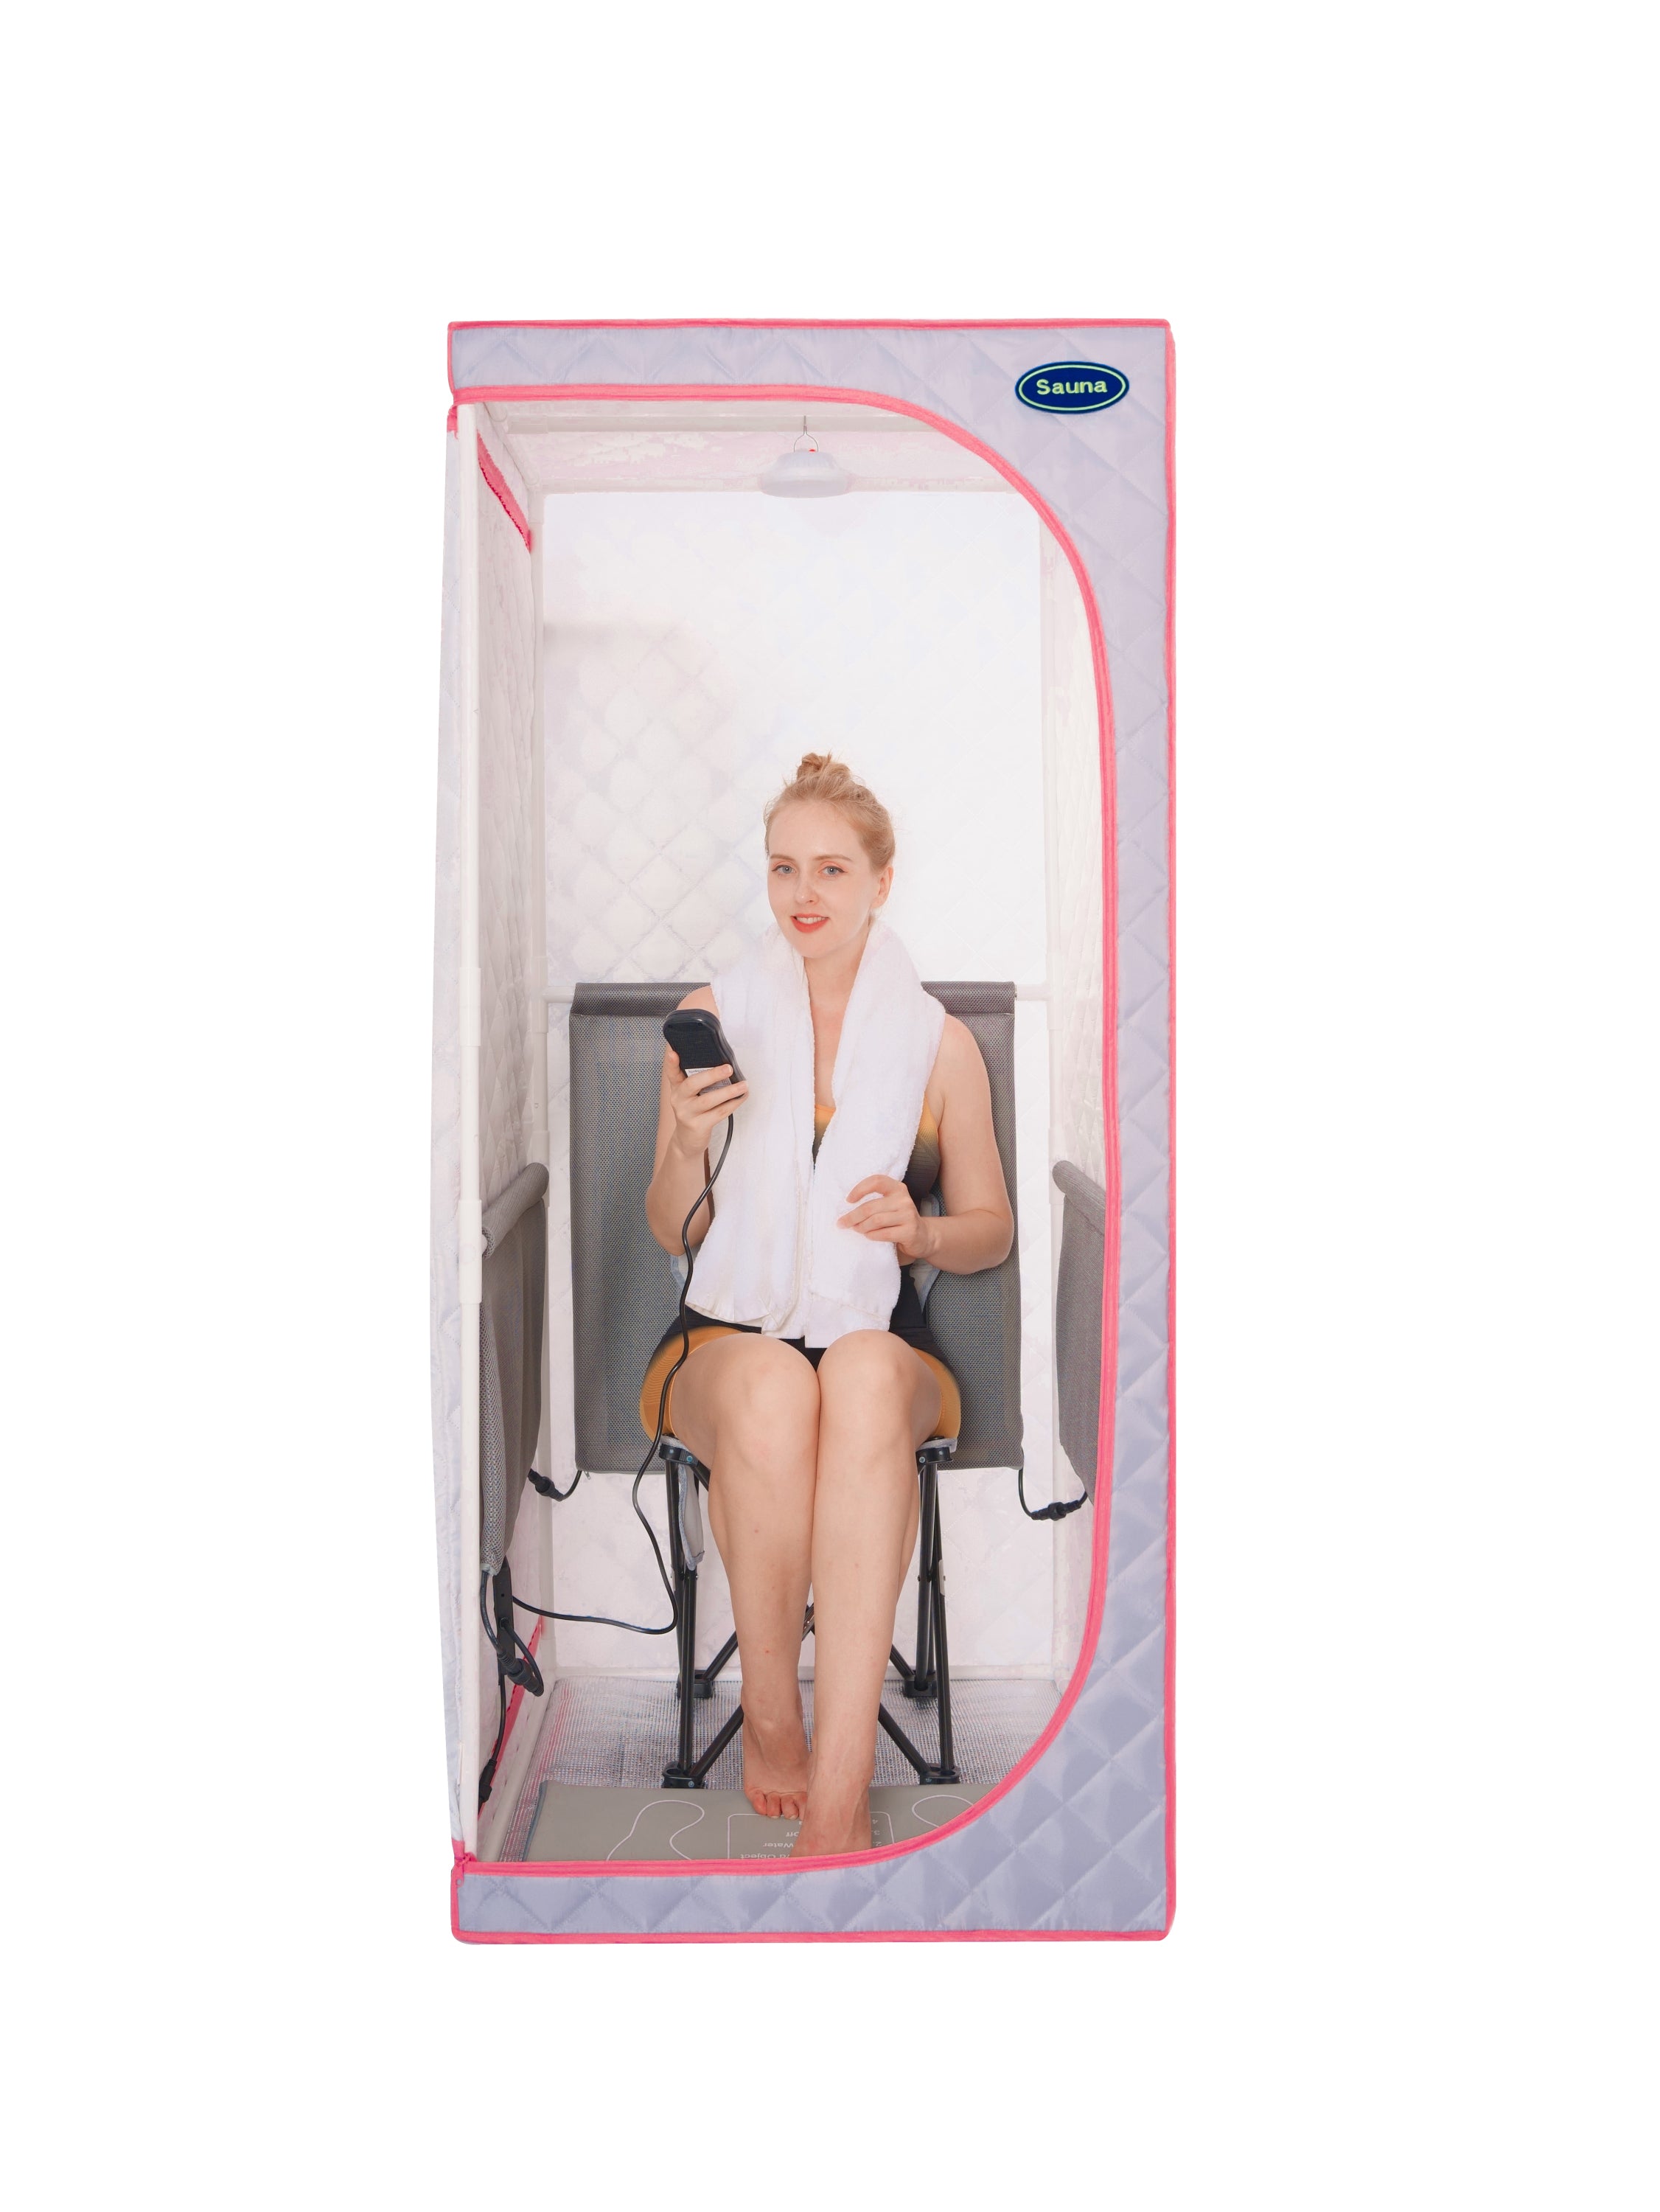 Portable Full Size Grey Infrared Sauna Tent with Infrared Panels, Heating Foot Pad,Controller, Foldable Chair ,Reading light, FCC Certificated